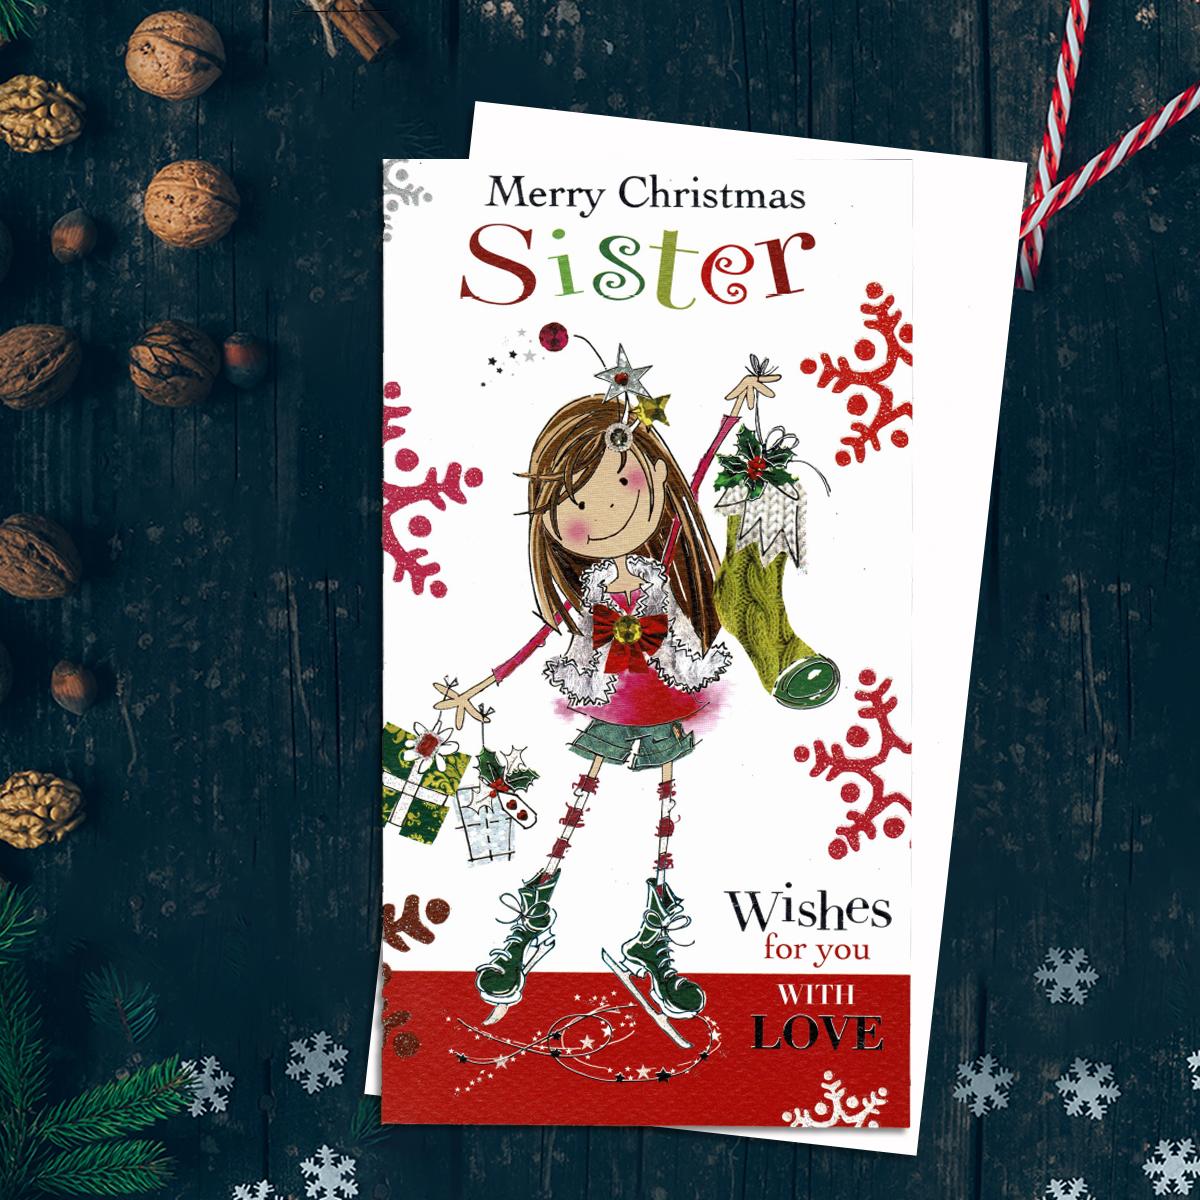 Merry Christmas Sister Wishes For You With Love Featuring A Quirky Young Lady On Ice Skates With Christmas Stocking And Gifts. Finished With Silver Foil Detail And Added Sparkle